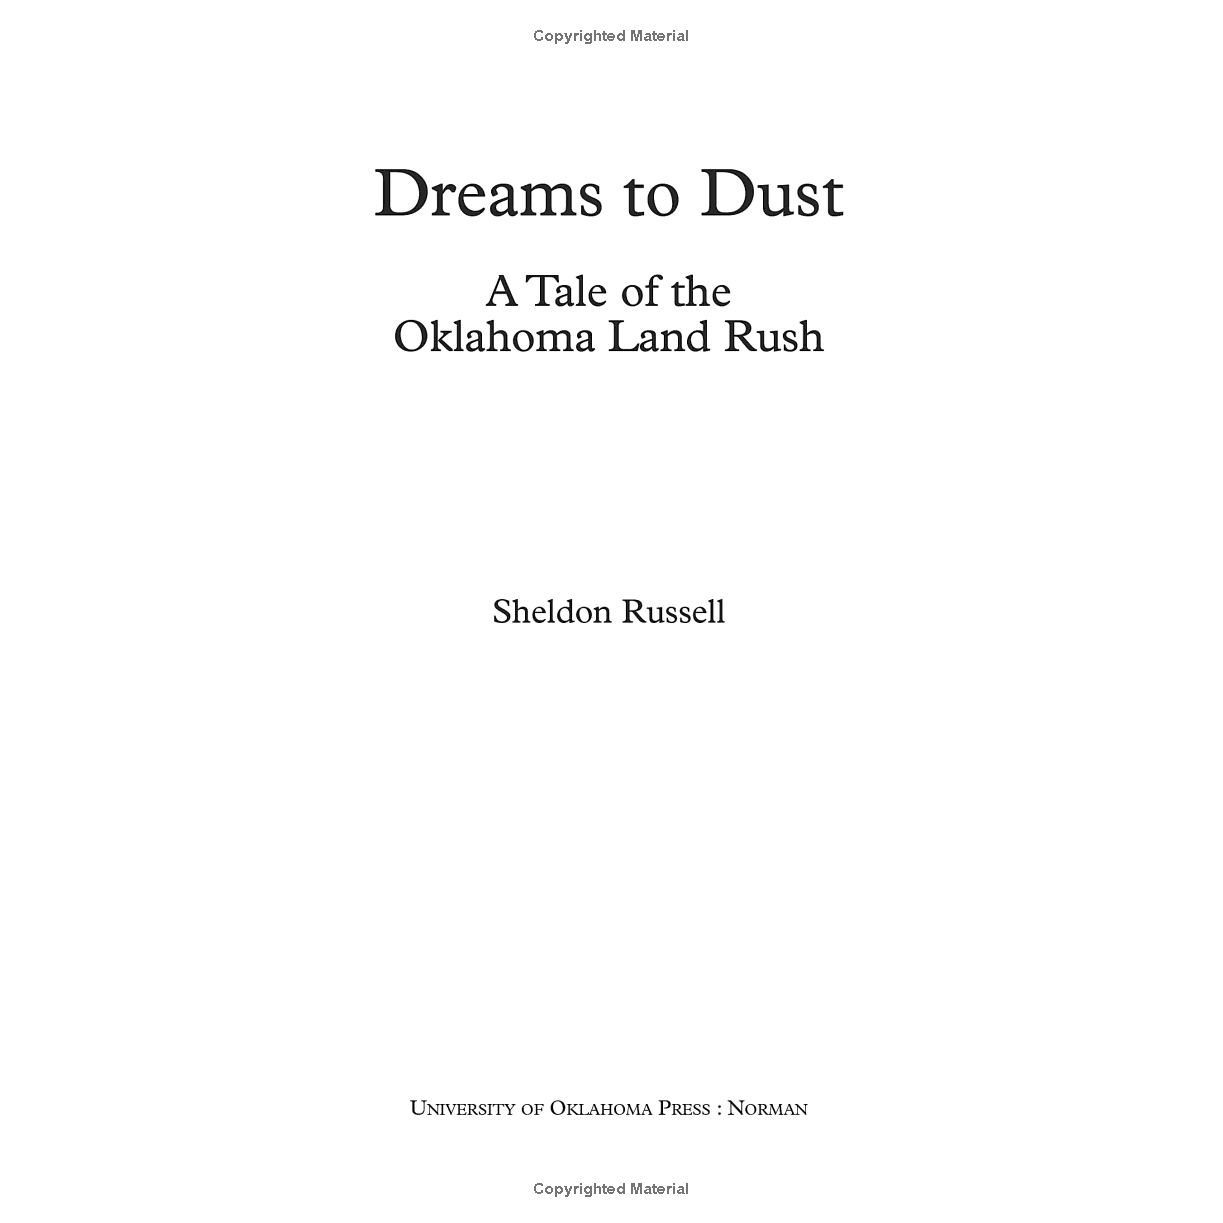 Dreams to Dust: A Tale of the Oklahoma Land Rush